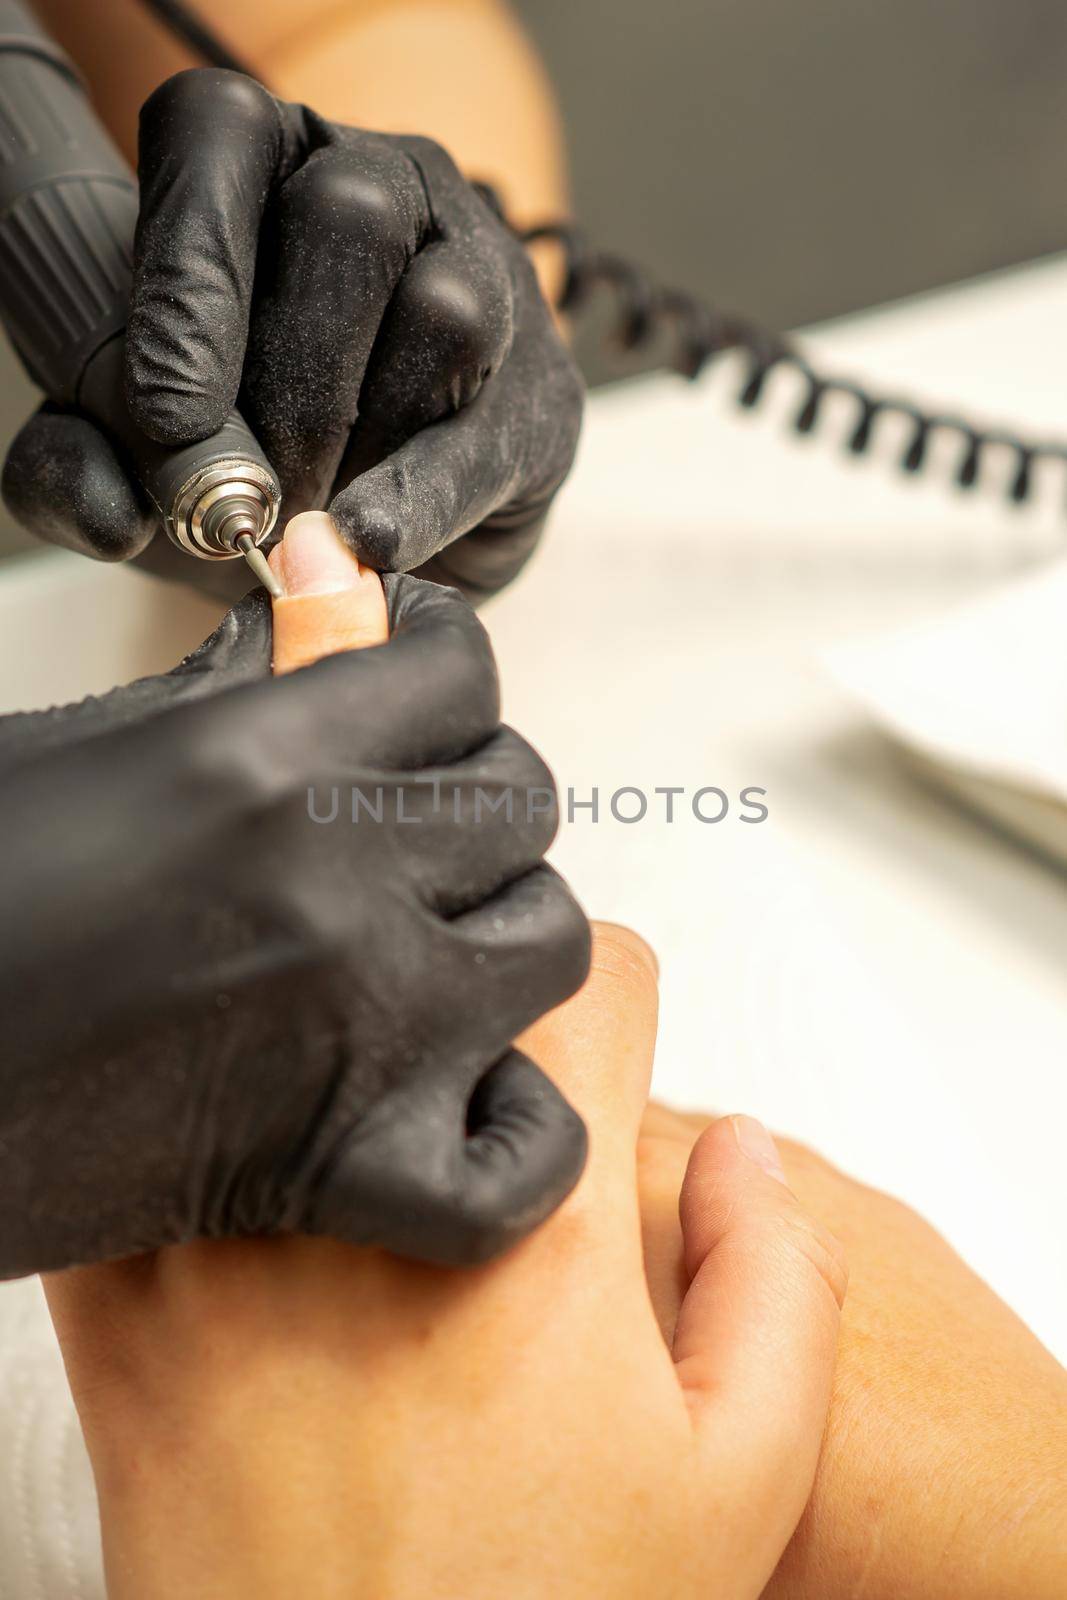 Manicure master uses electric nail file machine in a nail salon, close up